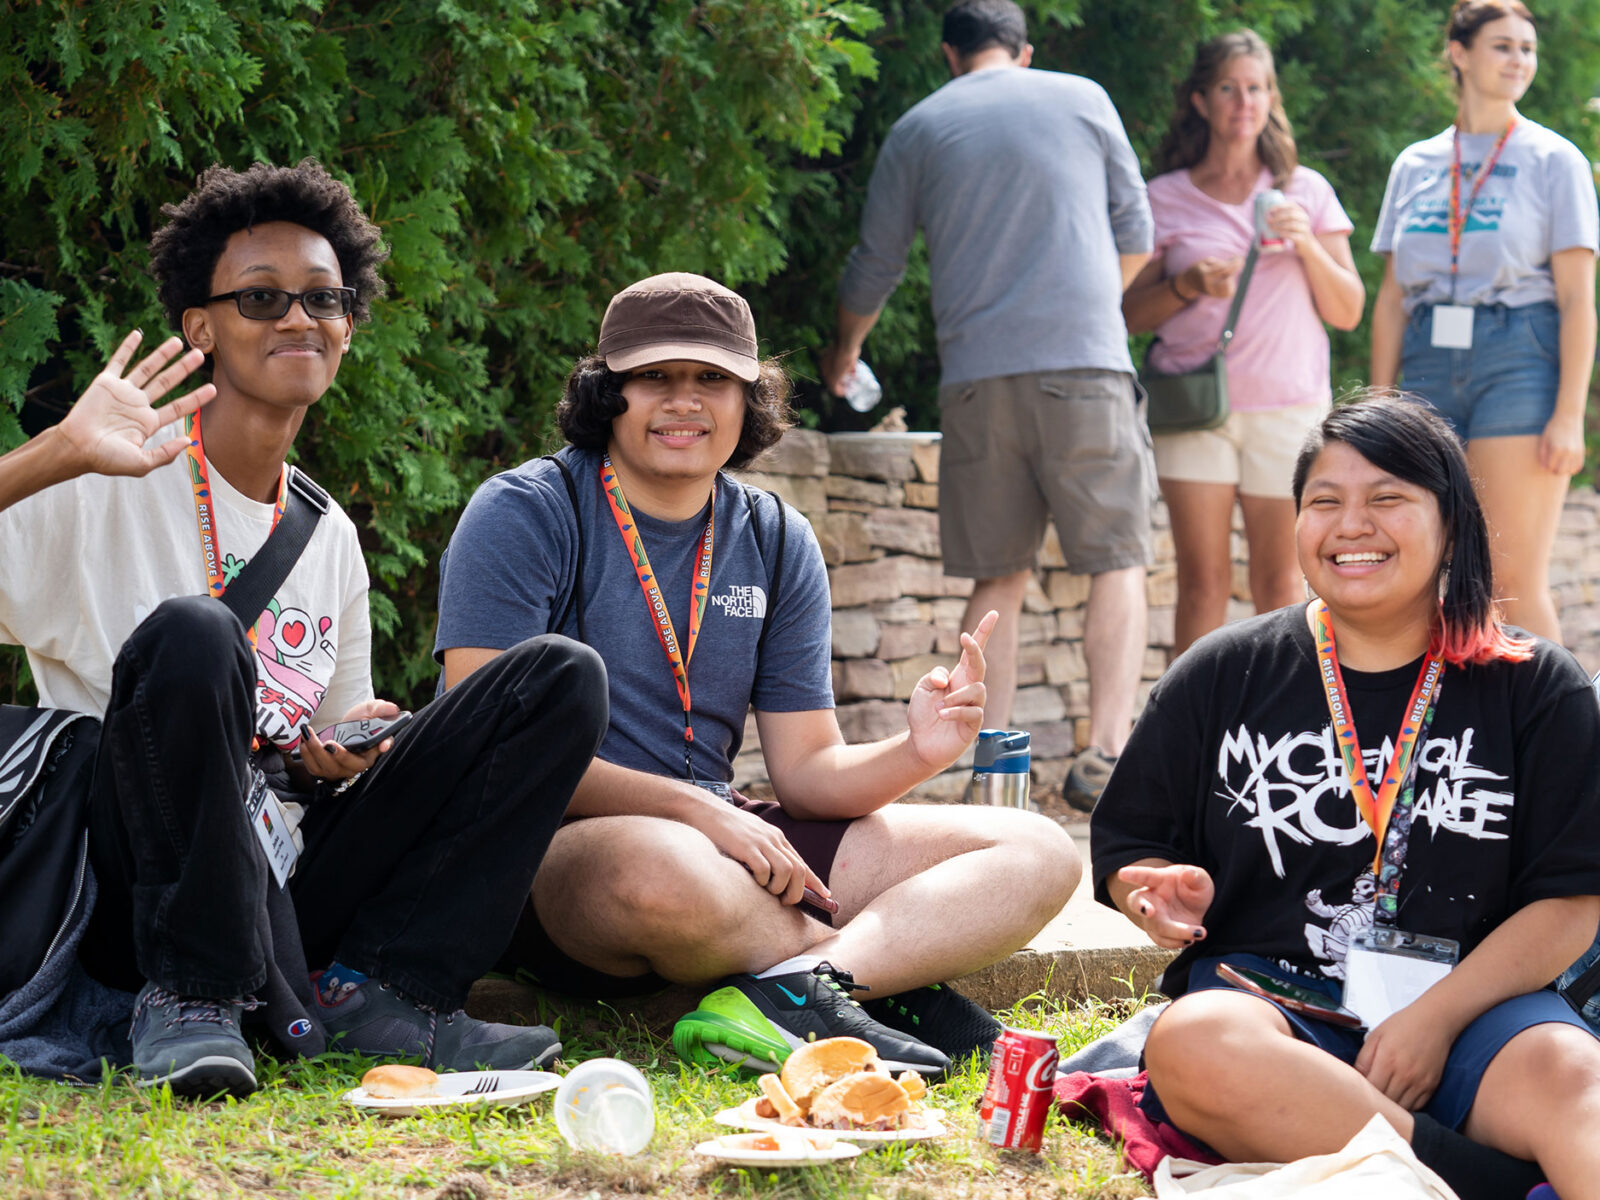 three students sit on the grass eating a BBQ lunch at orientation, waving and giving peace signs at the camera